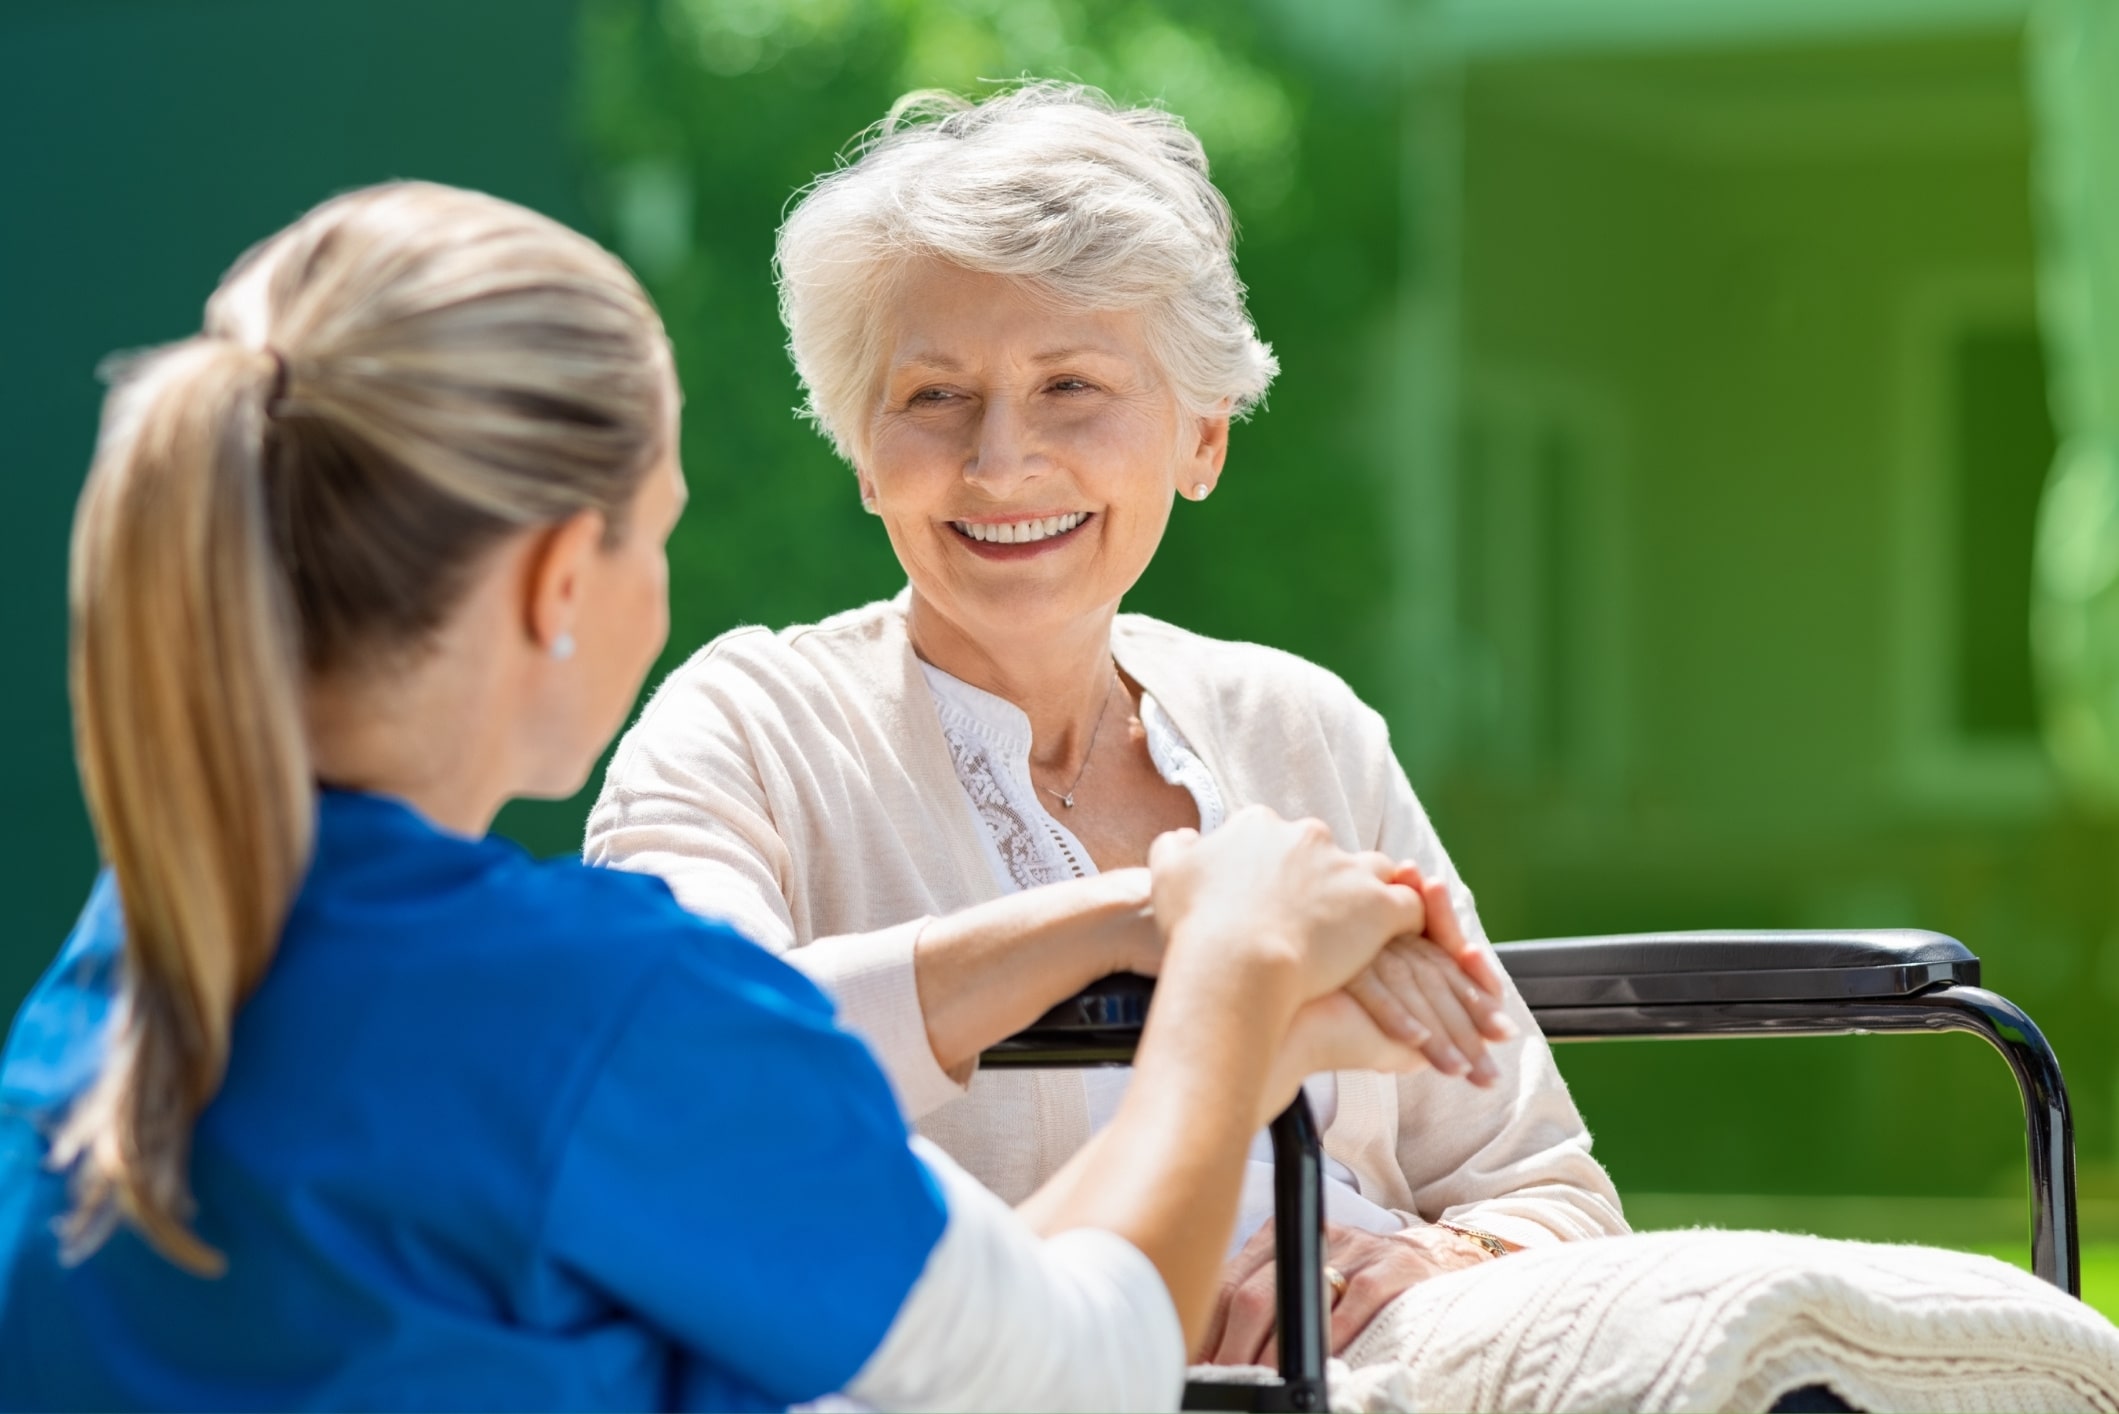 Top 8 questions on residential aged care and NDIS answered